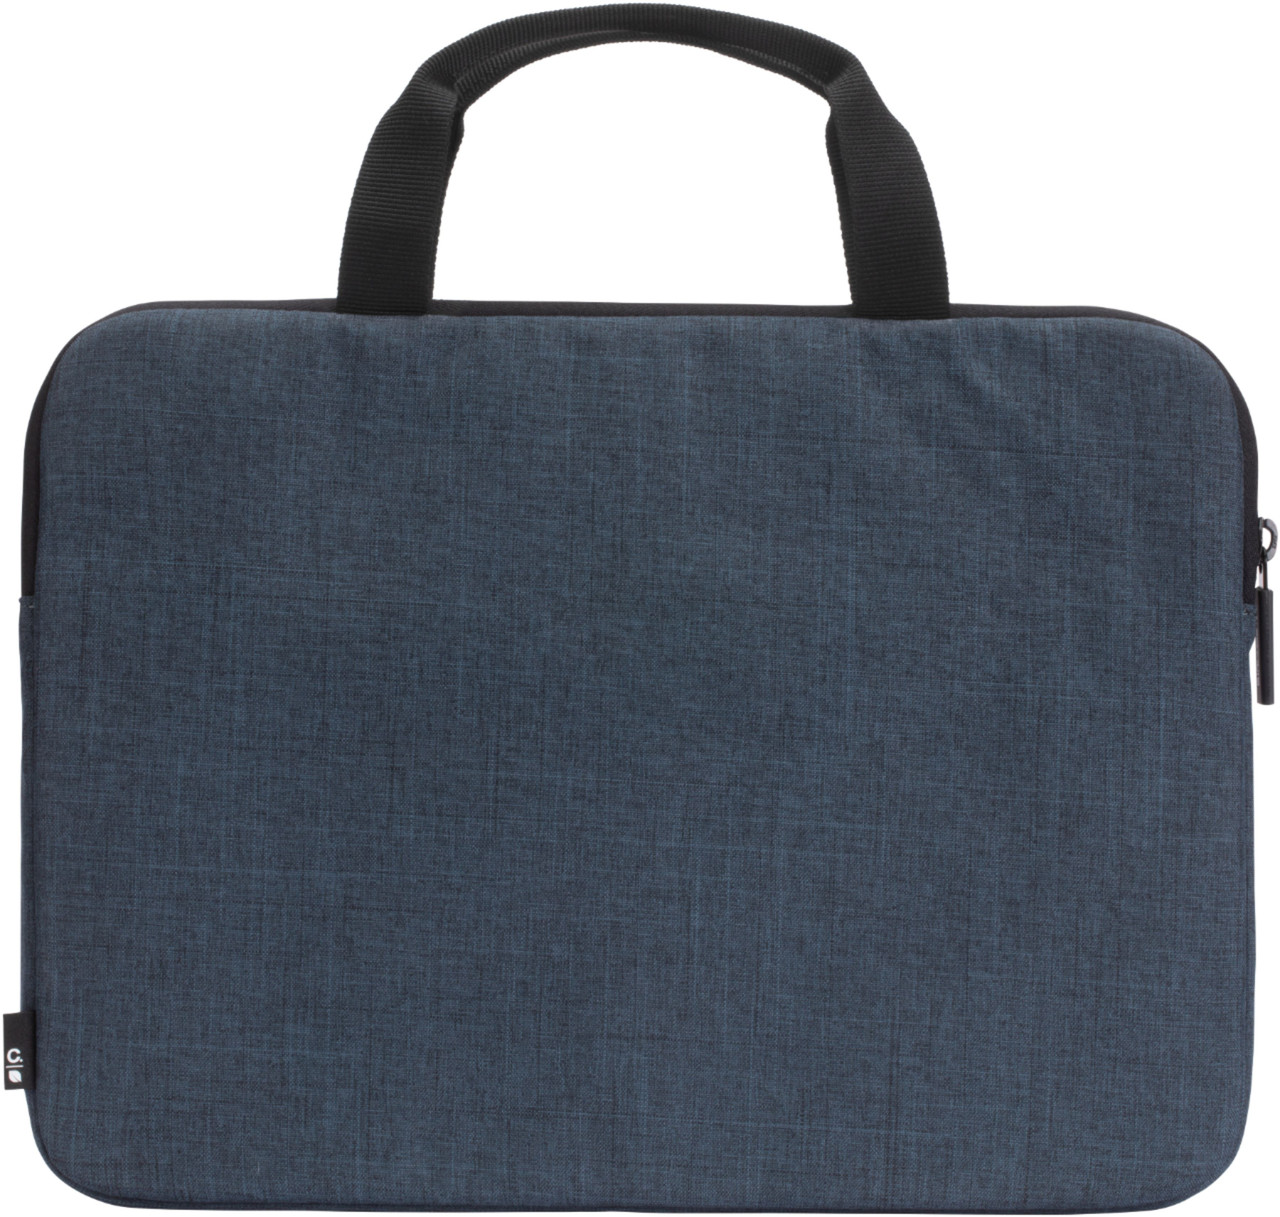 Incase Carry Zip Brief for most 13" Laptops or Tablets